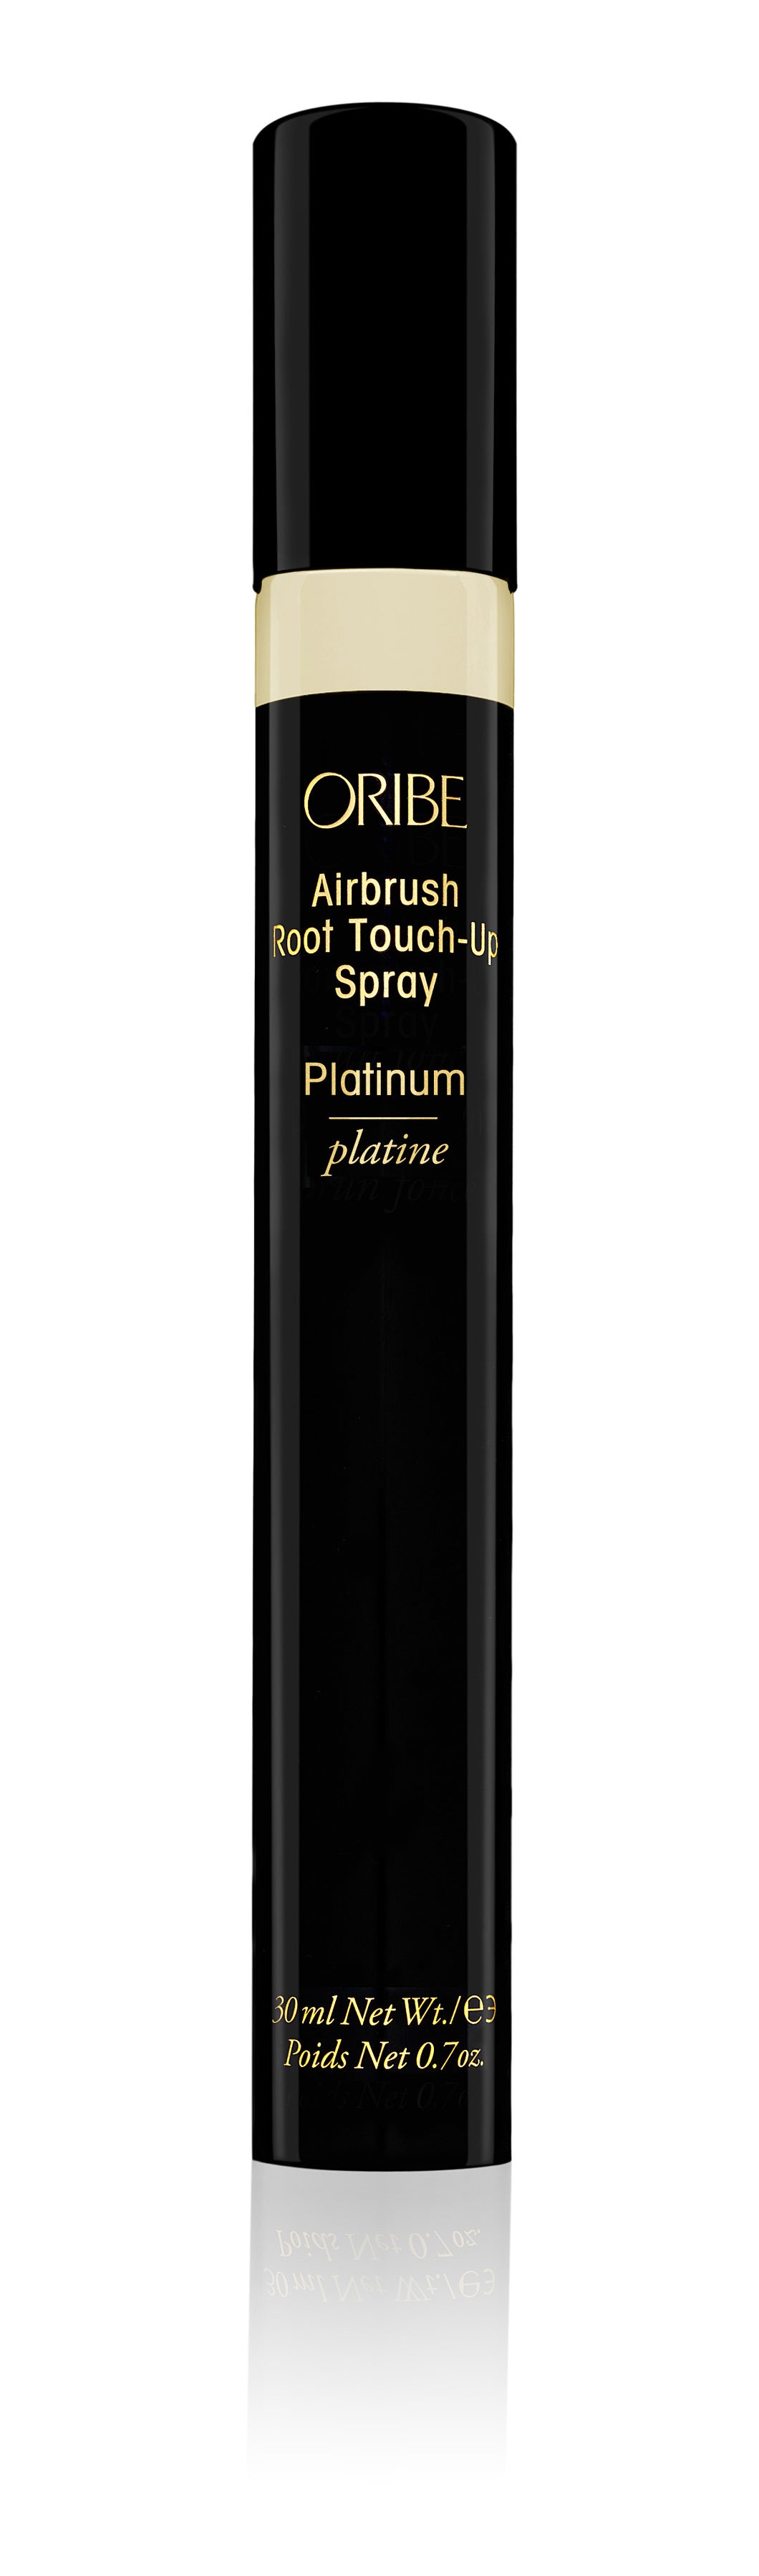 Airbrush Root Touch-Up Spray (Platinum), 7 OZ.